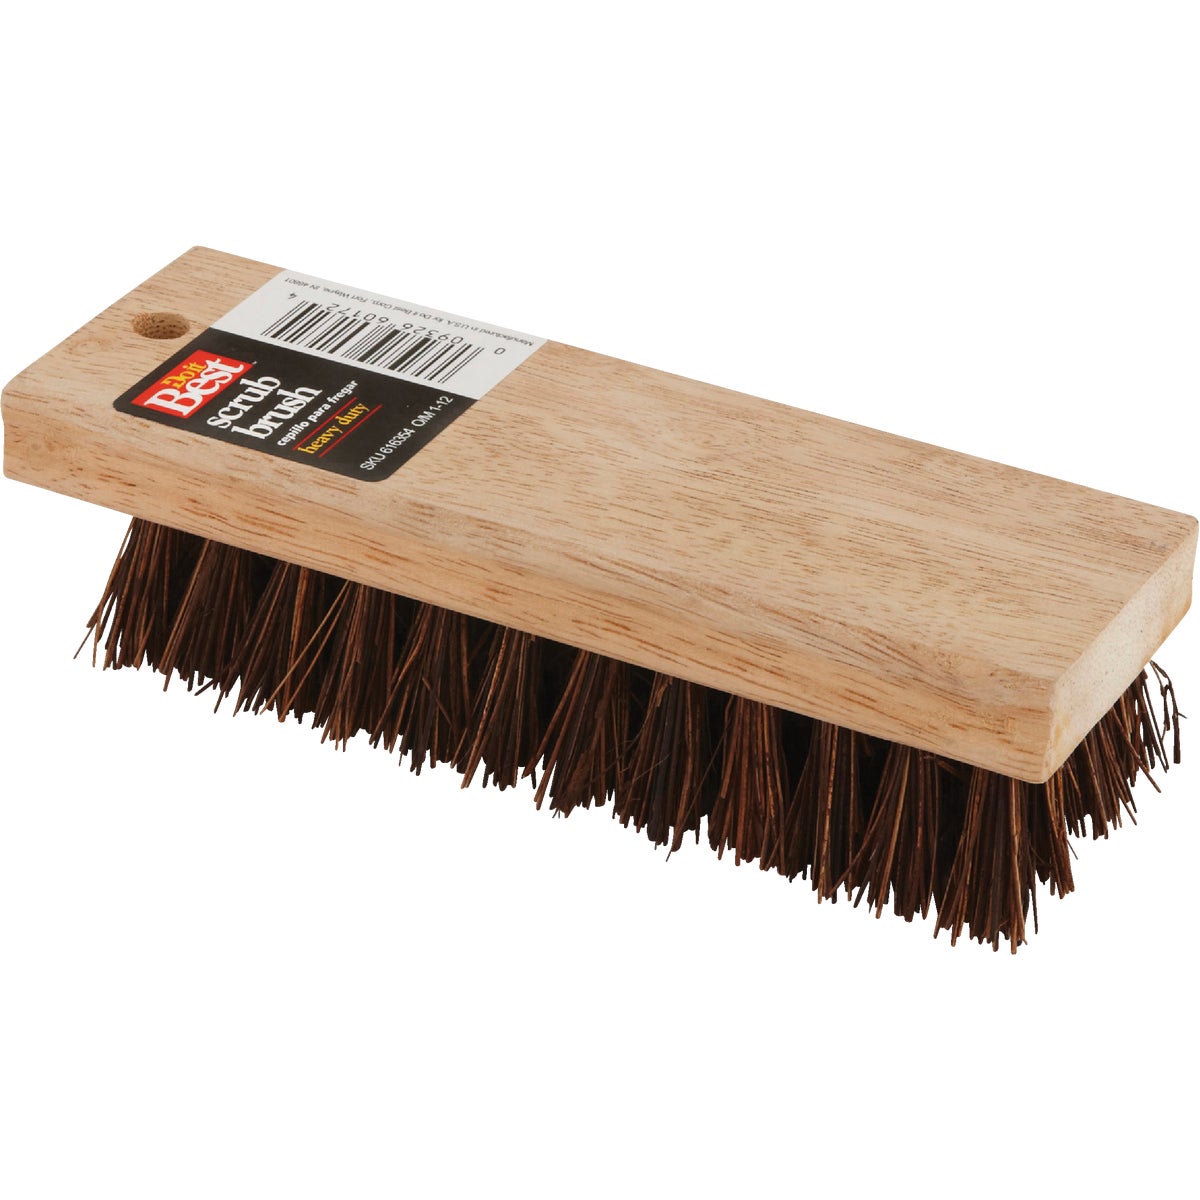 Item 616354, General-purpose brush for use in homes and by maintenance personnel.